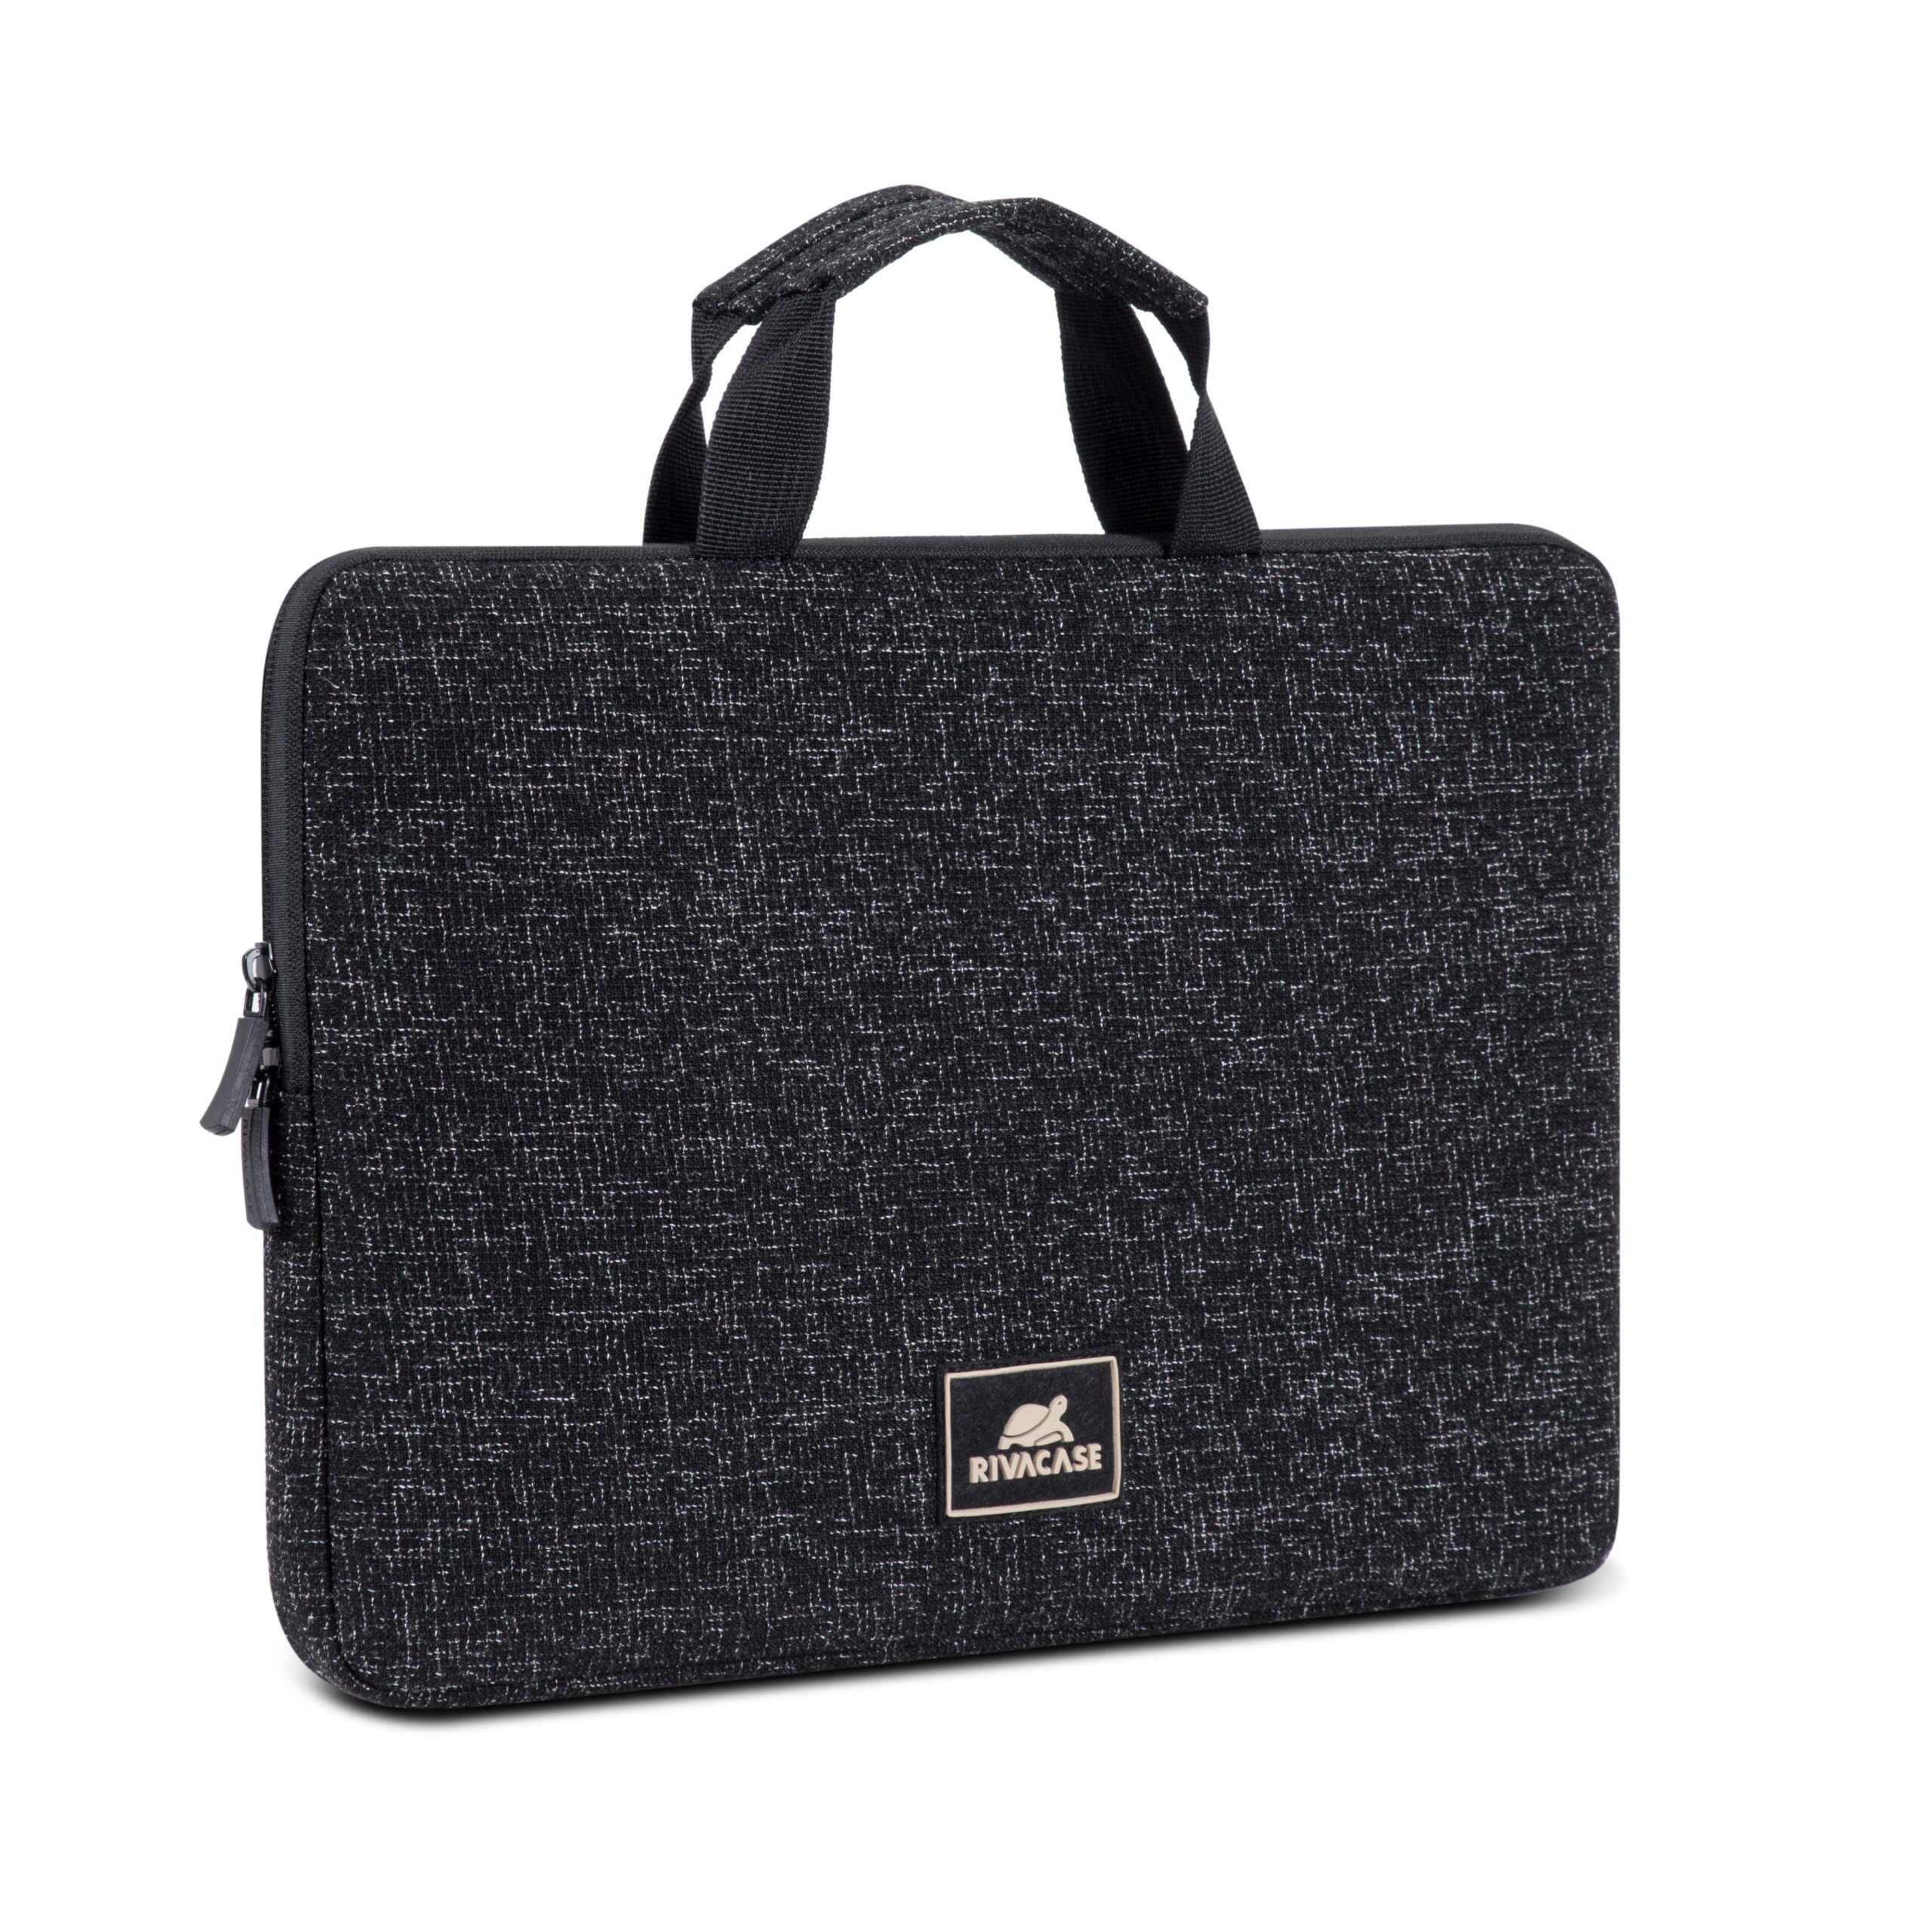 RIVACASE 7913 black Laptop sleeve 13.3″ with handl